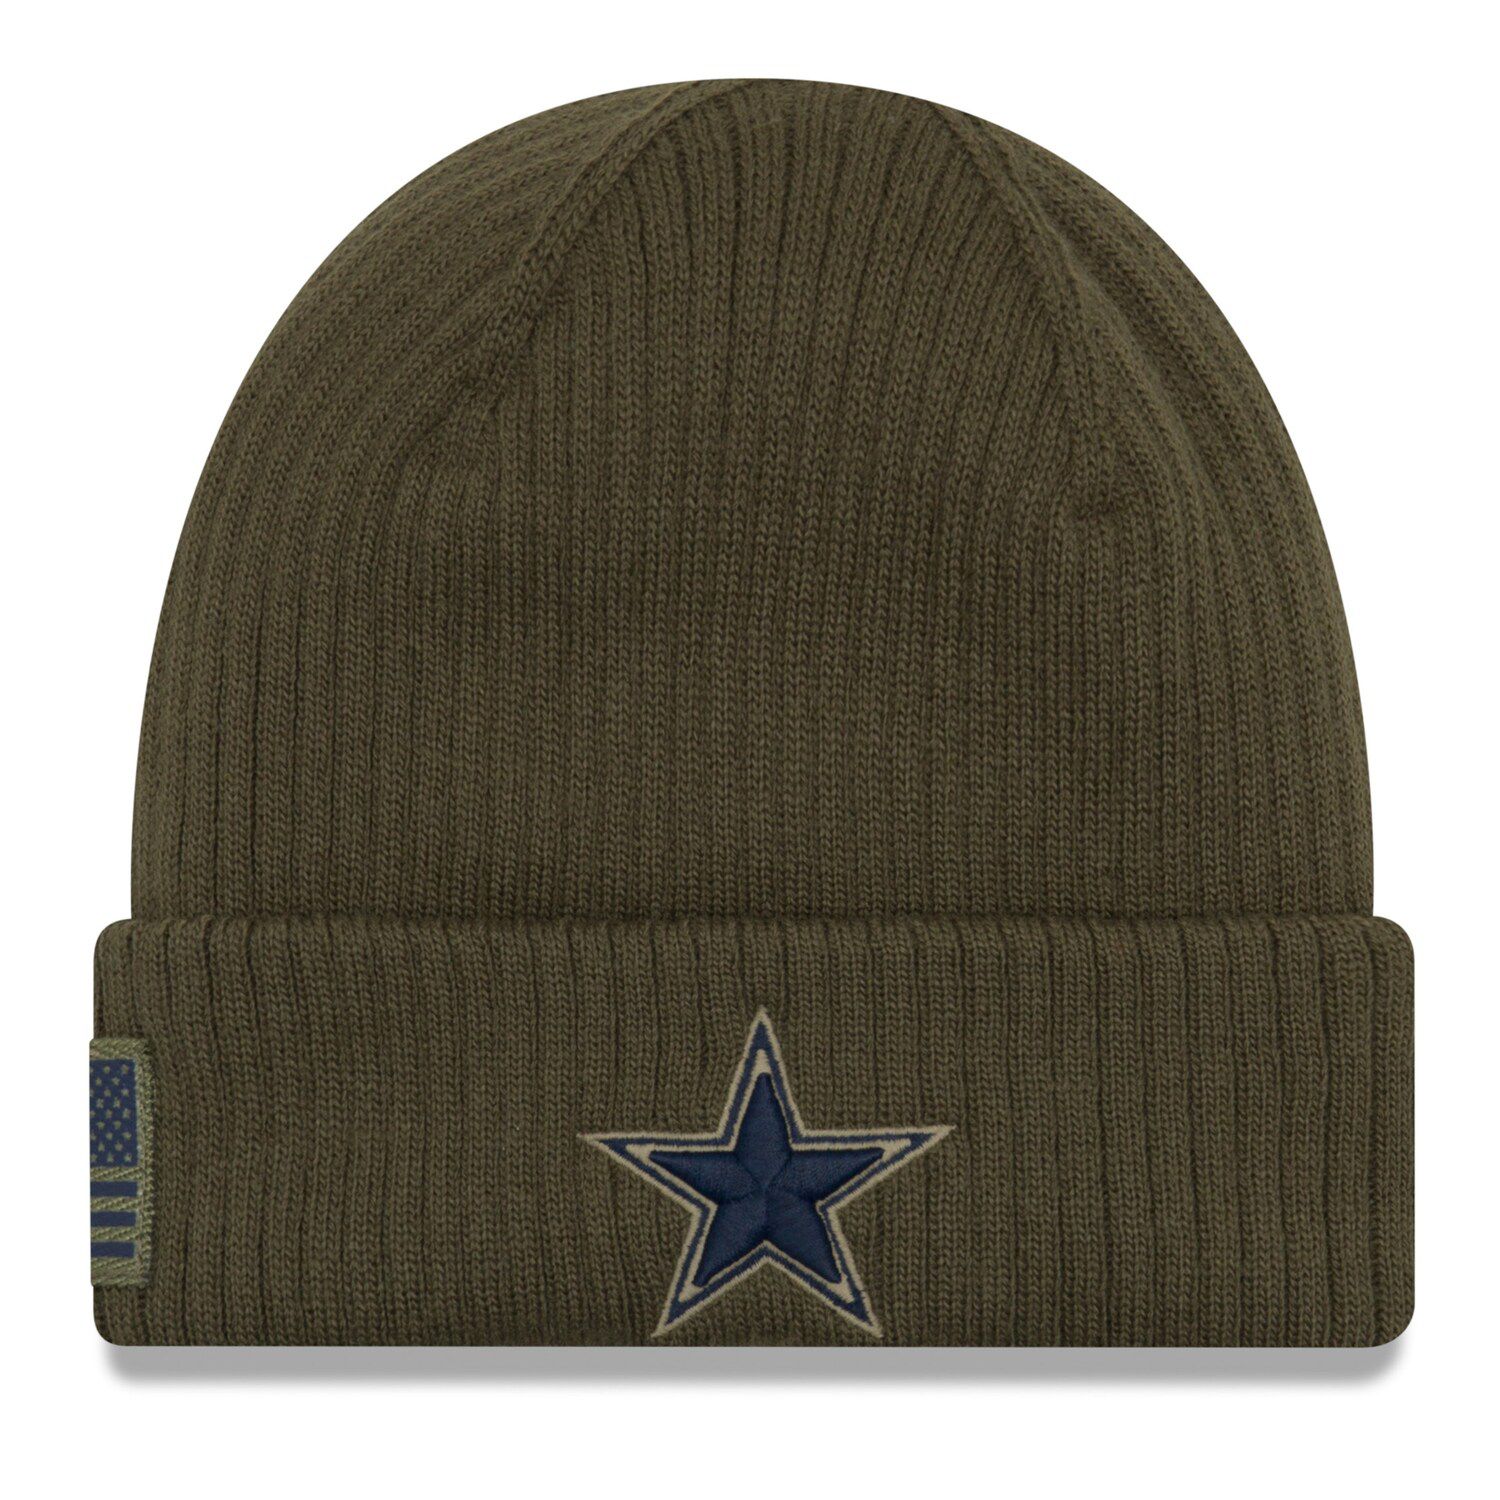 Salute to Service Sideline Cuffed Knit Hat